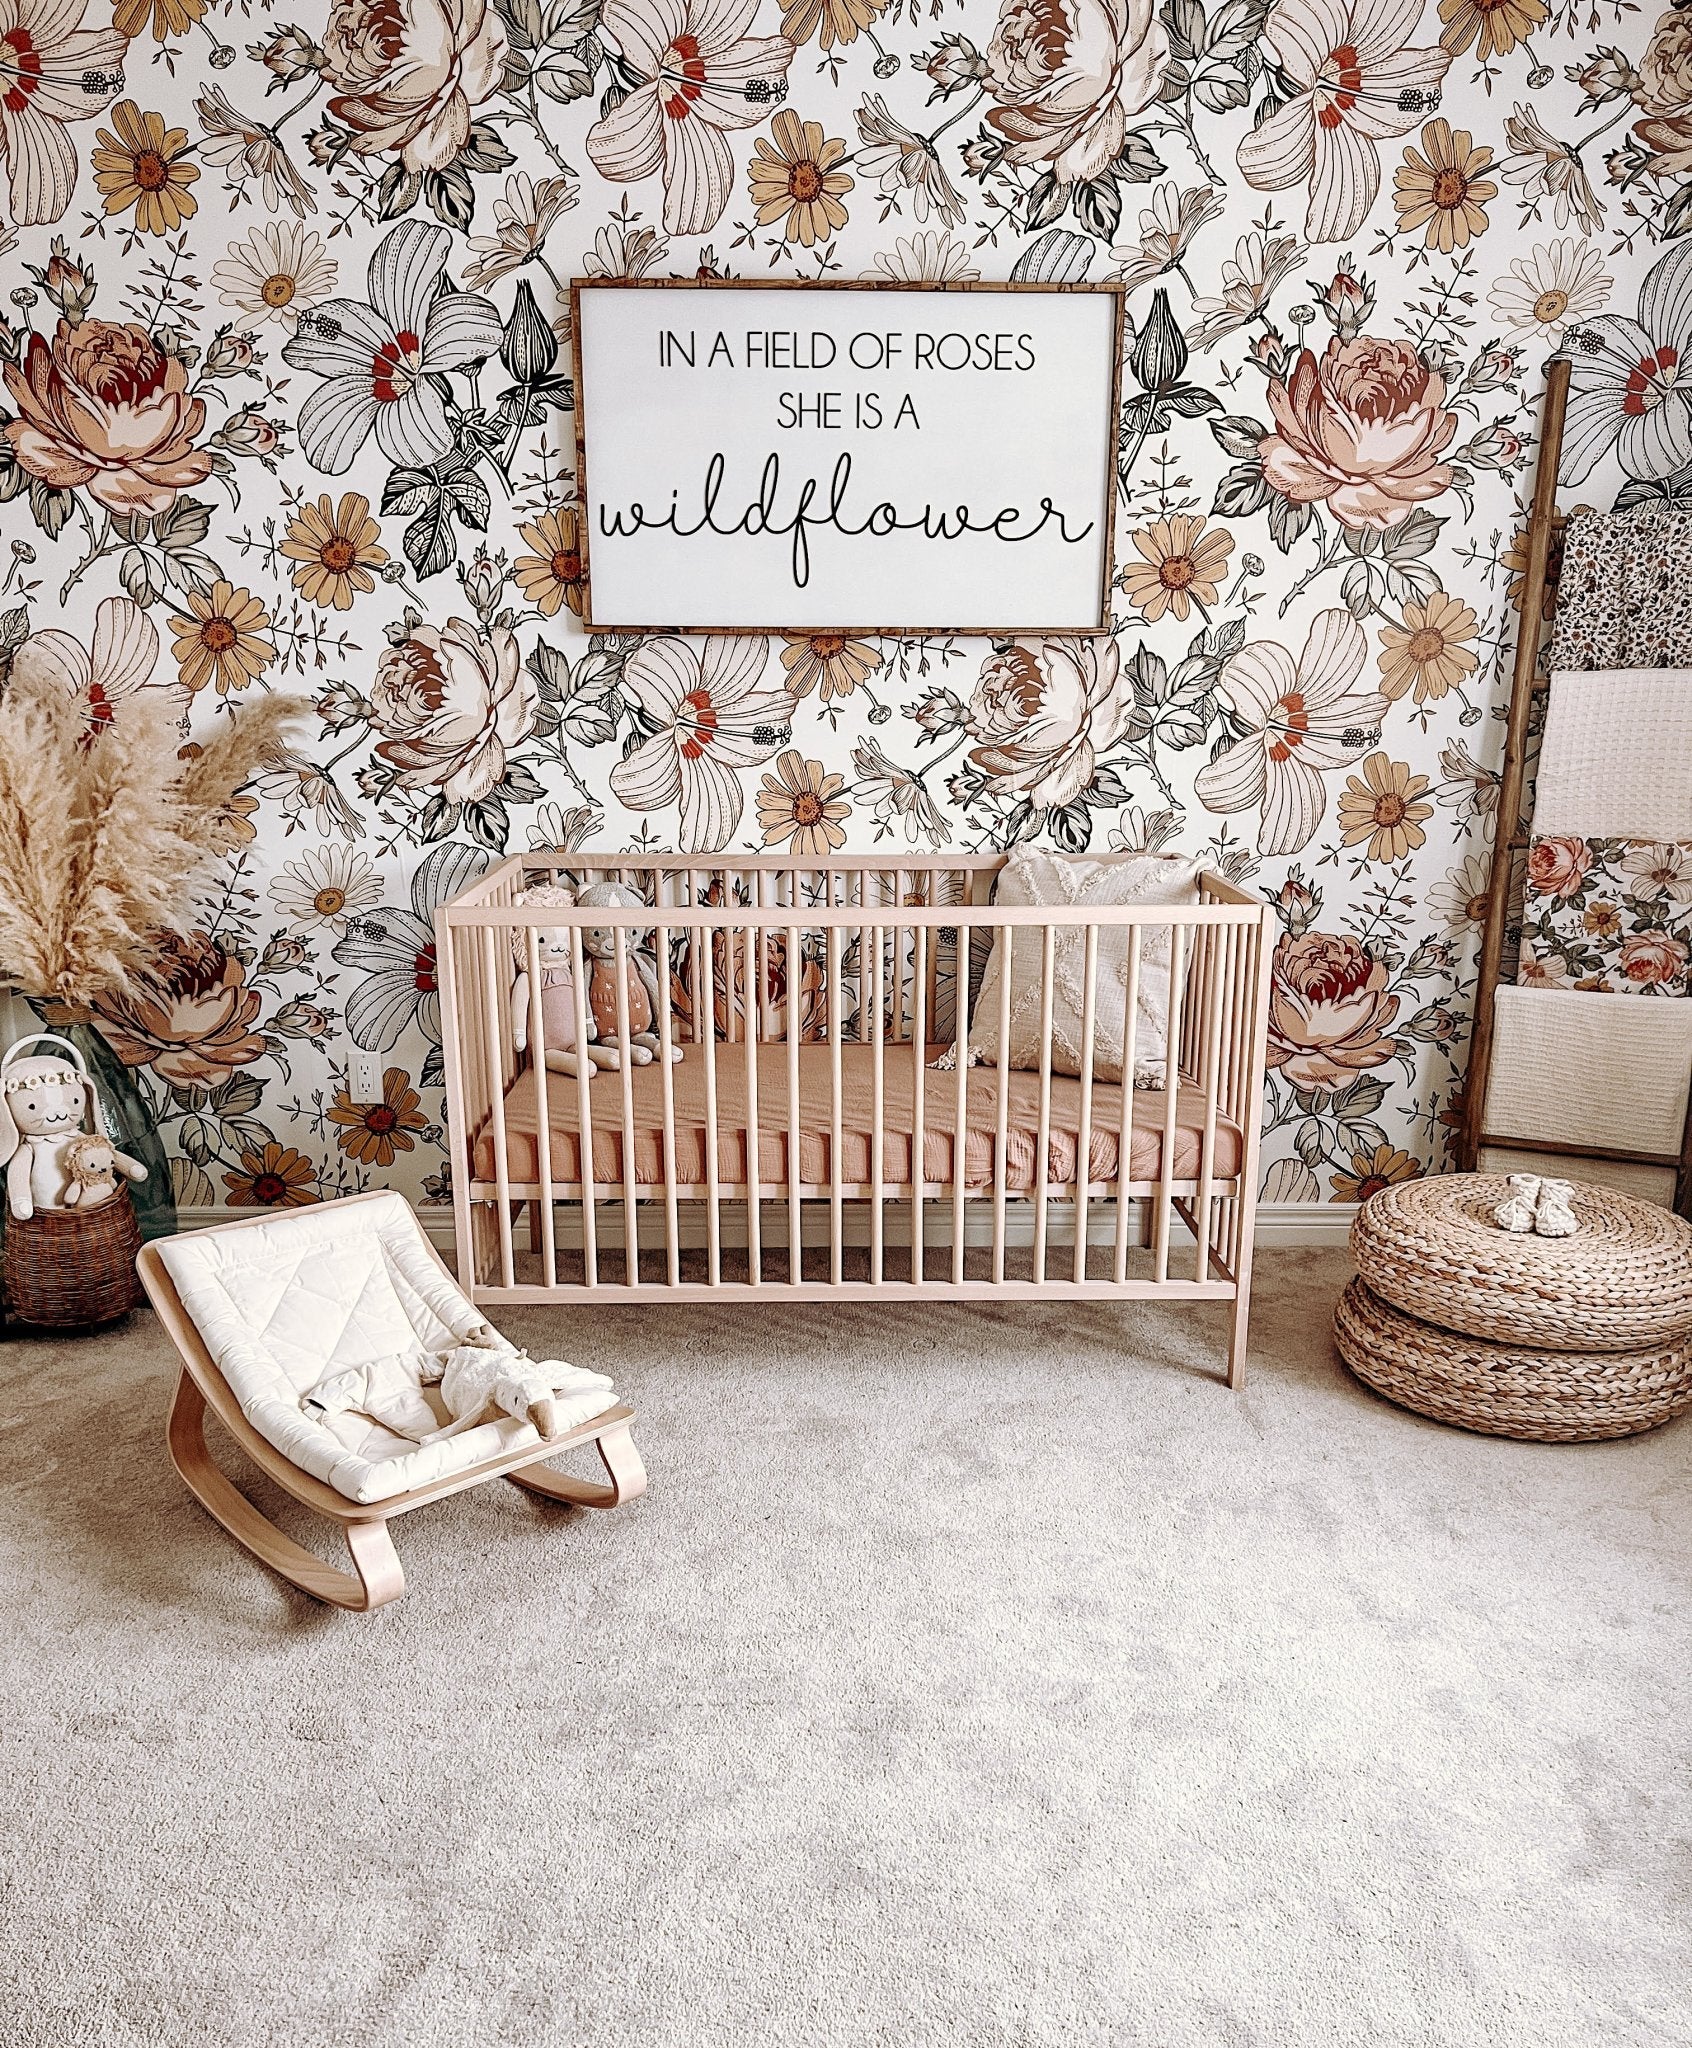 Vintage-Inspired Wallpaper Designs For Your Home